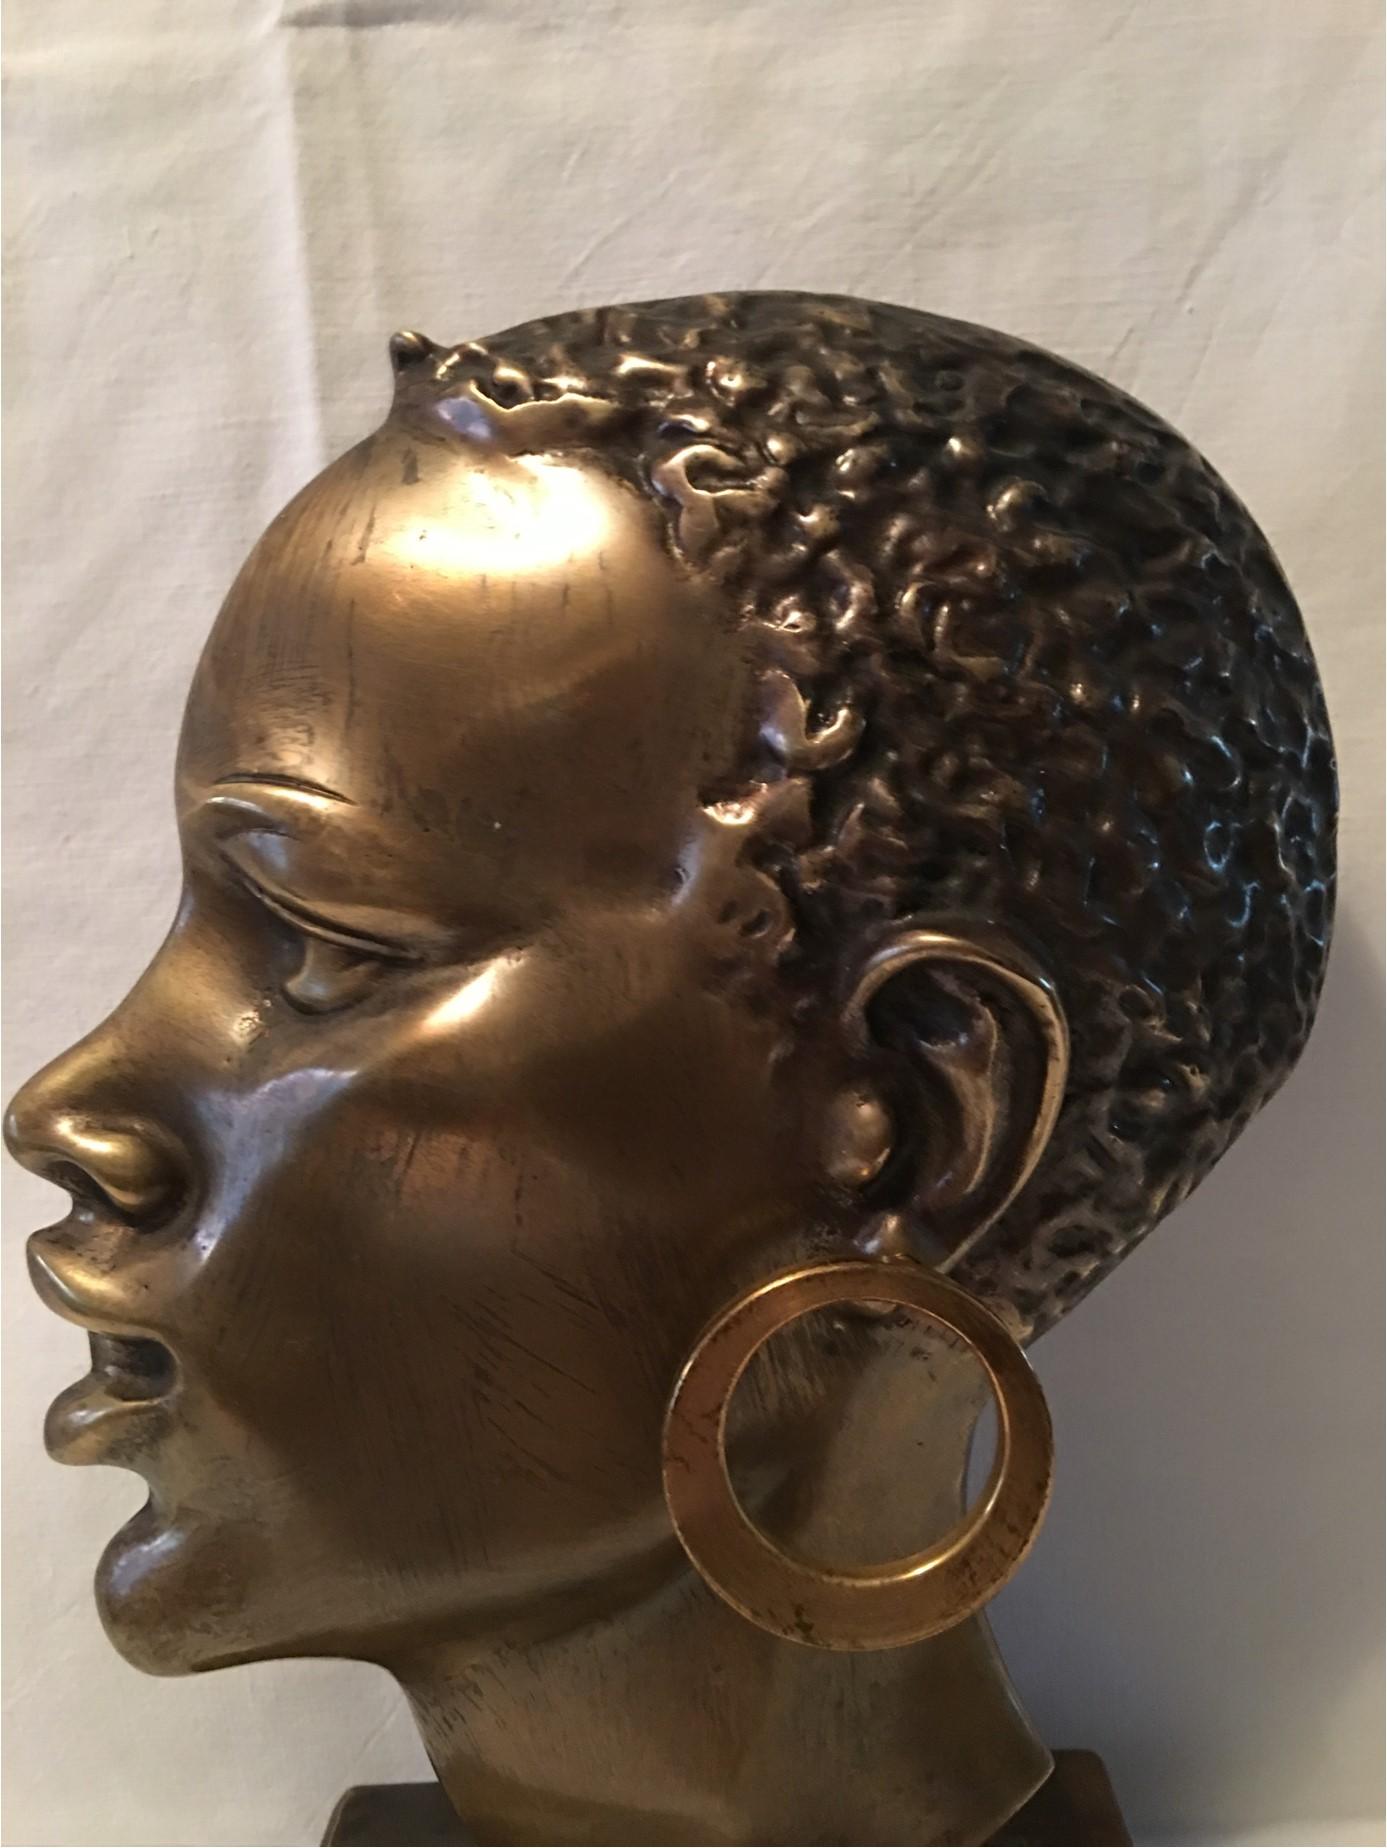 A very detailed lovely brass bust of an African Native sitting on a marble base. From the design shops of Hagenauer in Austria from the 1950s era. With a nice aged patina.